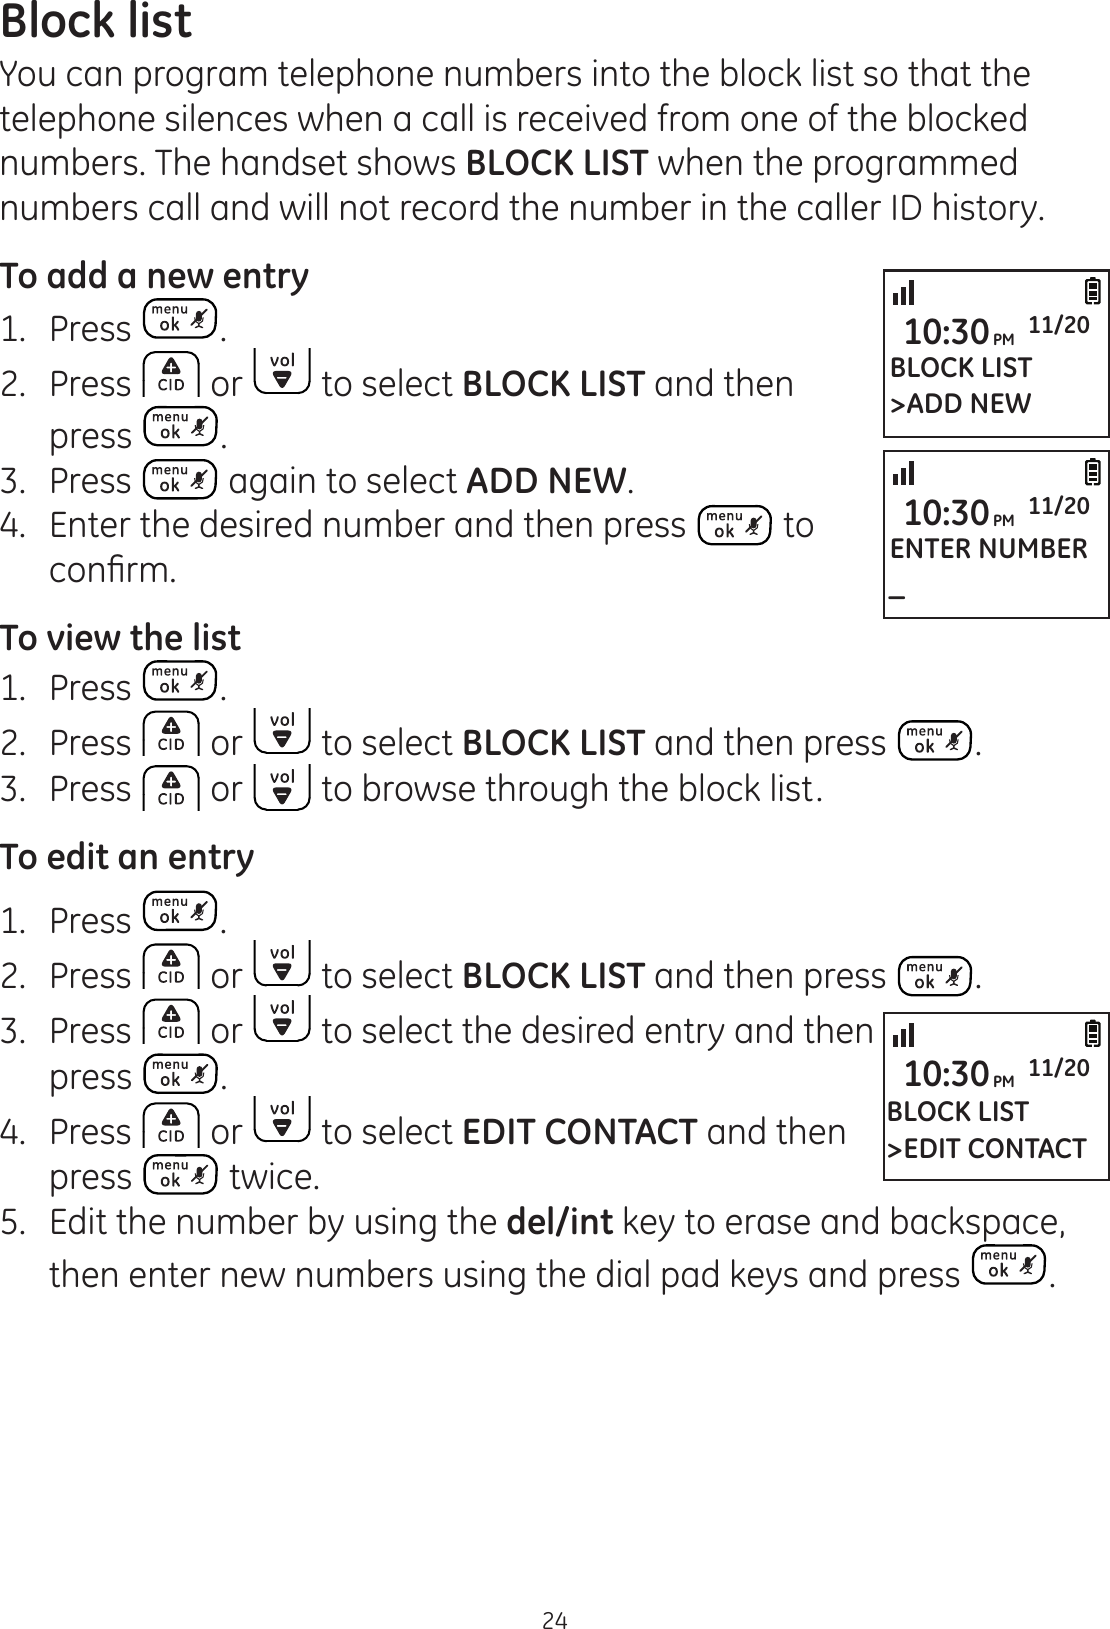 24Block listYou can program telephone numbers into the block list so that the telephone silences when a call is received from one of the blocked numbers. The handset shows BLOCK LIST when the programmed numbers call and will not record the number in the caller ID history. To add a new entry1.   Press . 2.  Press   or   to select BLOCK LIST and then press  .3.  Press   again to select ADD NEW.4.  Enter the desired number and then press   to FRQ¿UPTo view the list1.   Press  . 2.  Press   or   to select BLOCK LIST and then press  .3.   Press   or   to browse through the block list. To edit an entry1.   Press  . 2.  Press   or   to select BLOCK LIST and then press  .3.  Press   or   to select the desired entry and then press  . 4.  Press   or   to select EDIT CONTACT and then press   twice.5.  Edit the number by using the del/int key to erase and backspace, then enter new numbers using the dial pad keys and press  . BLOCK LIST&gt;ADD NEW10:30PM 11/20ENTER NUMBER_10:30PM 11/20BLOCK LIST&gt;EDIT CONTACT10:30PM 11/20